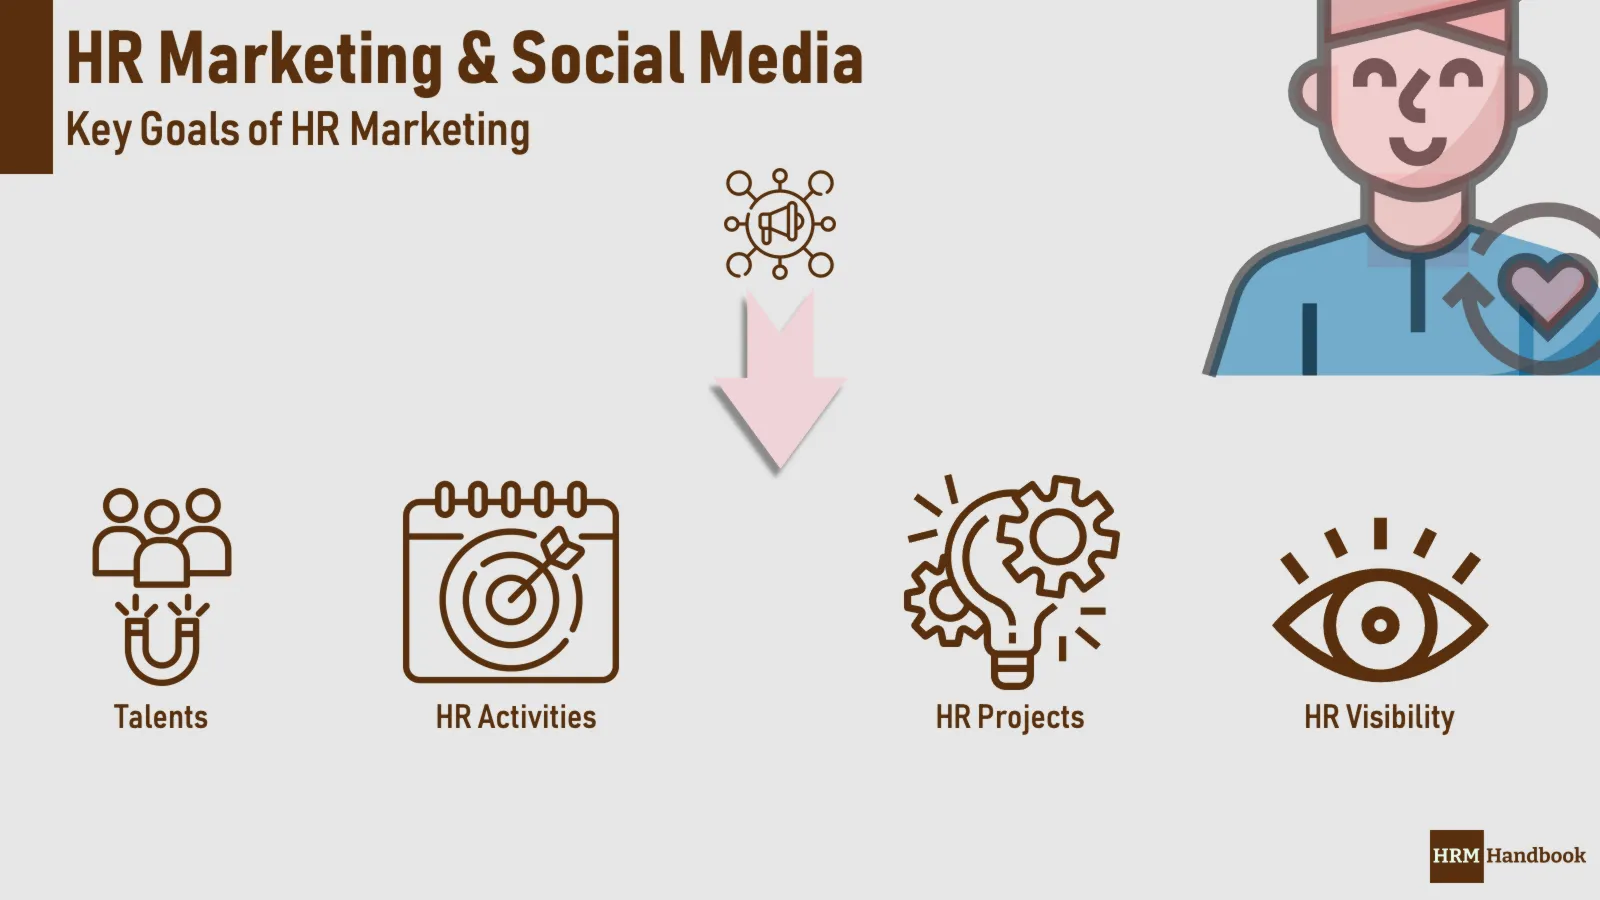 Most Common Goals of HR Marketing